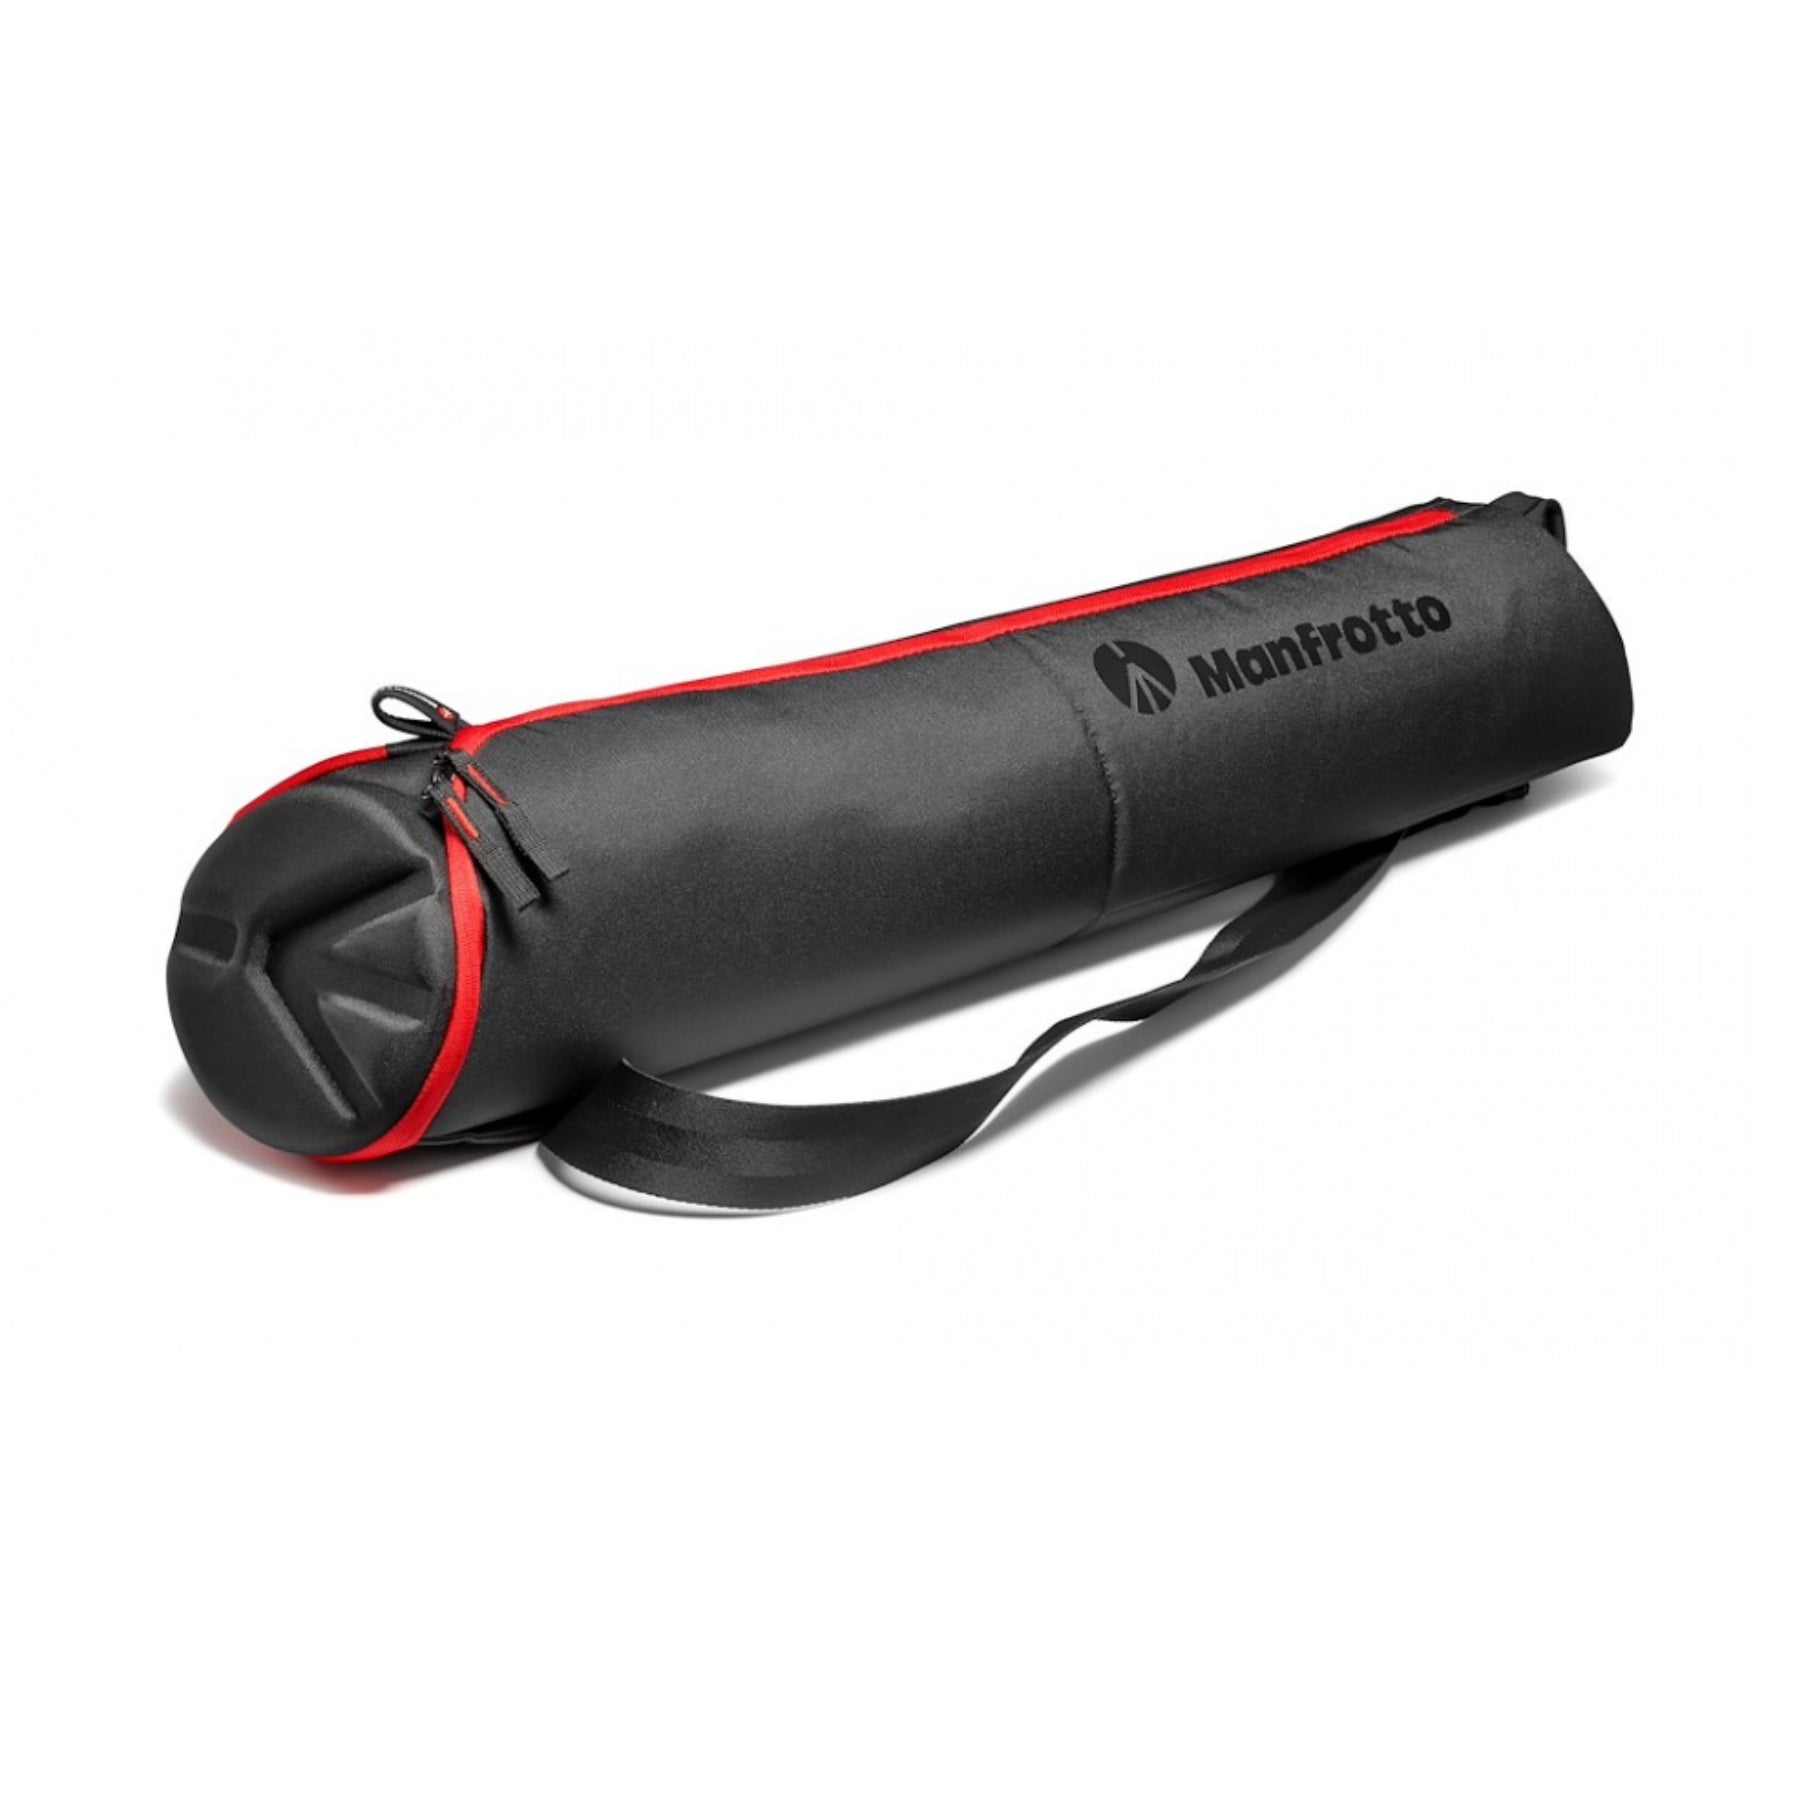 Buy Manfrotto MBAG75PN Tripod Bag Padded 75cm at Topic Store